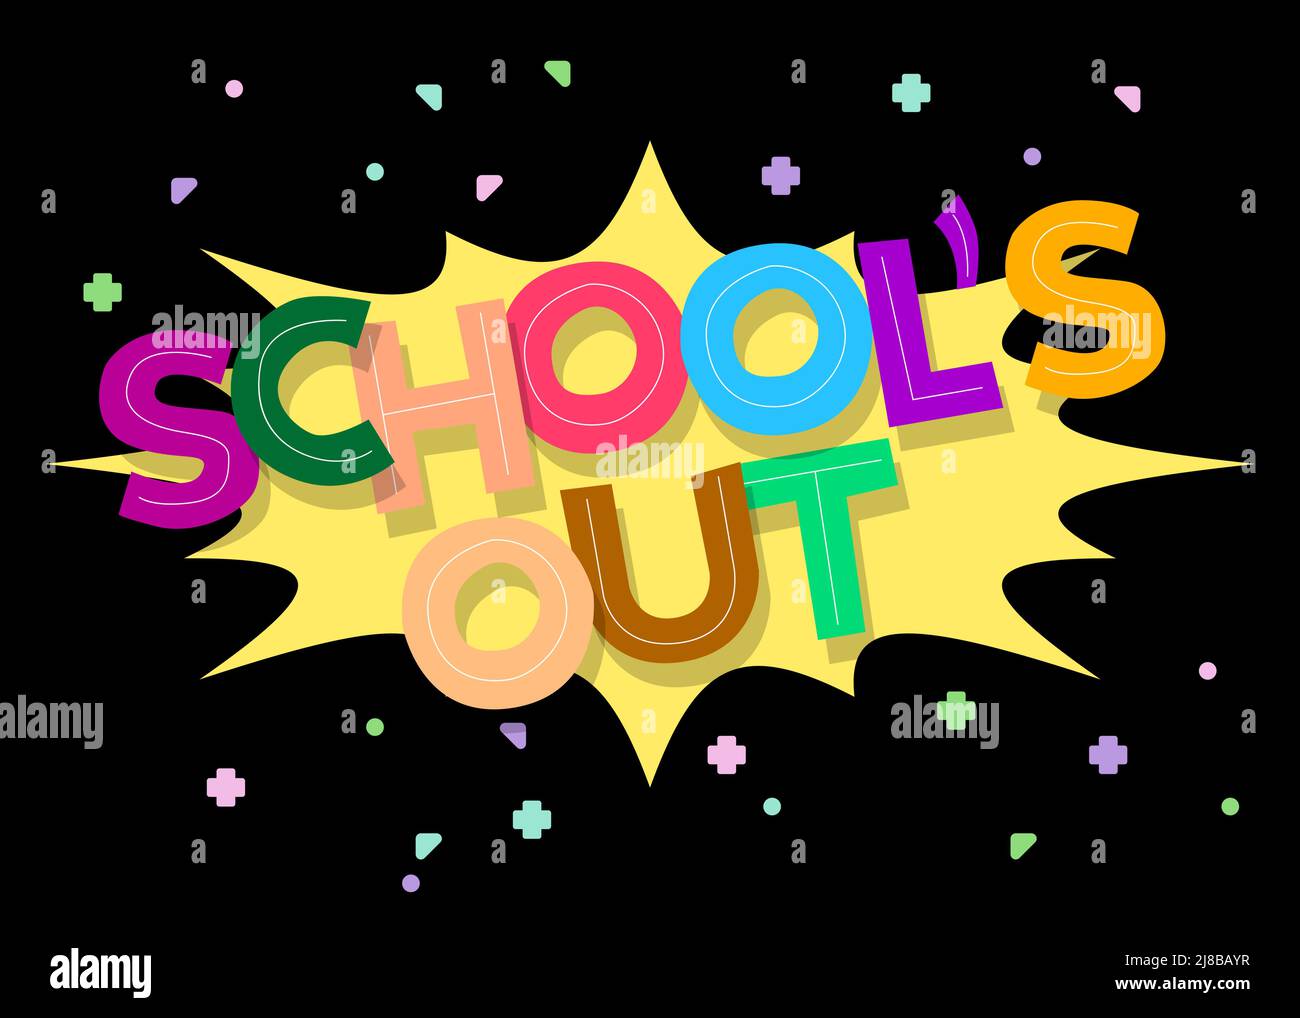 School's Out. Word written with Children's font in cartoon style. Stock Vector